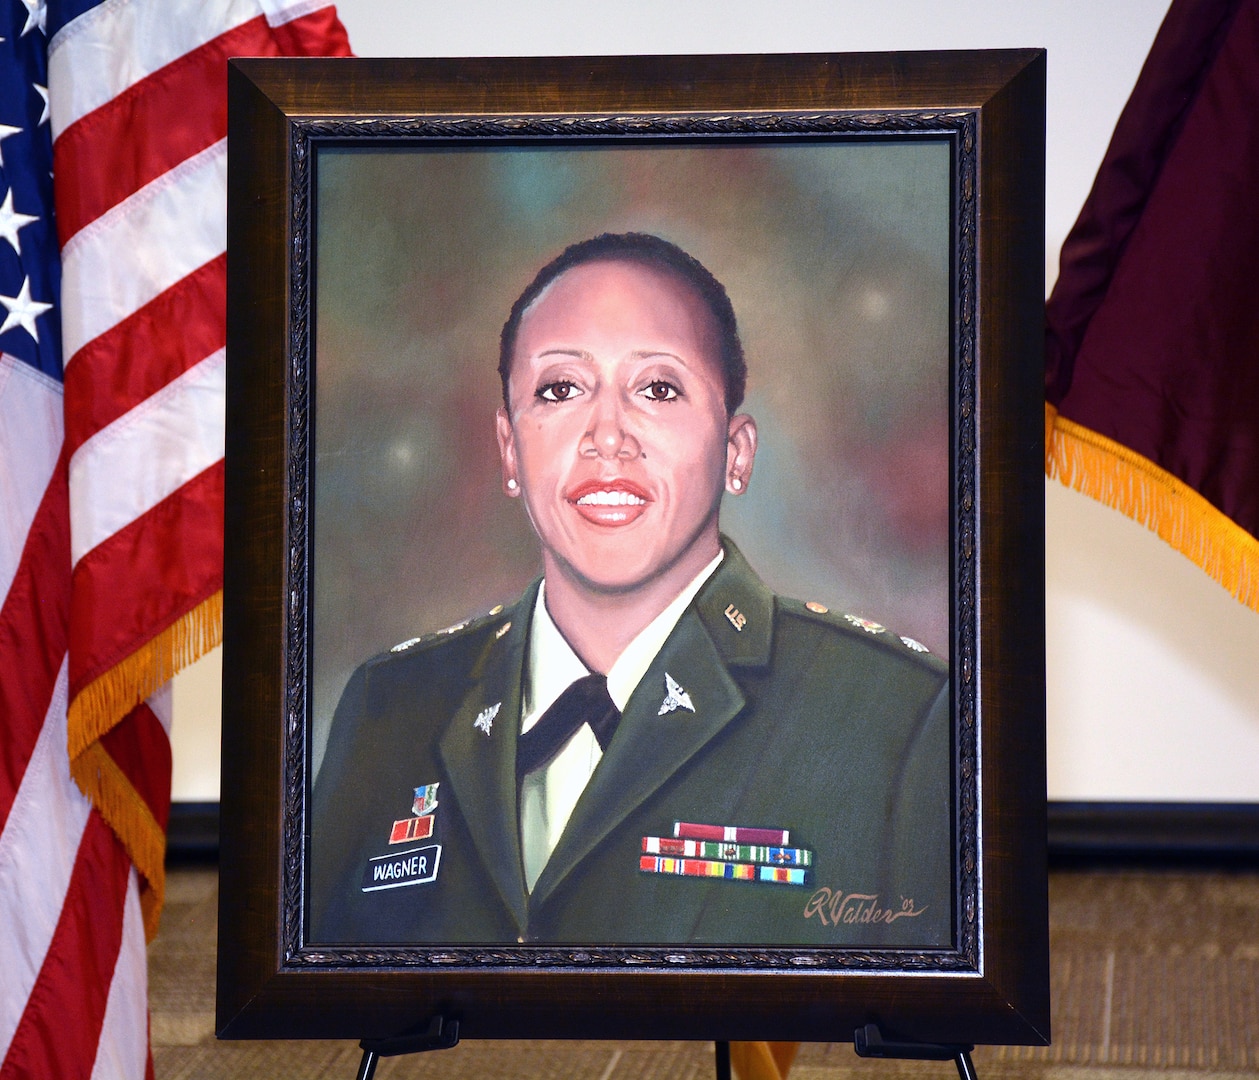 Painting of Lt. Col. Karen Wagner, who lost her life while serving at the Pentagon on 9/11.